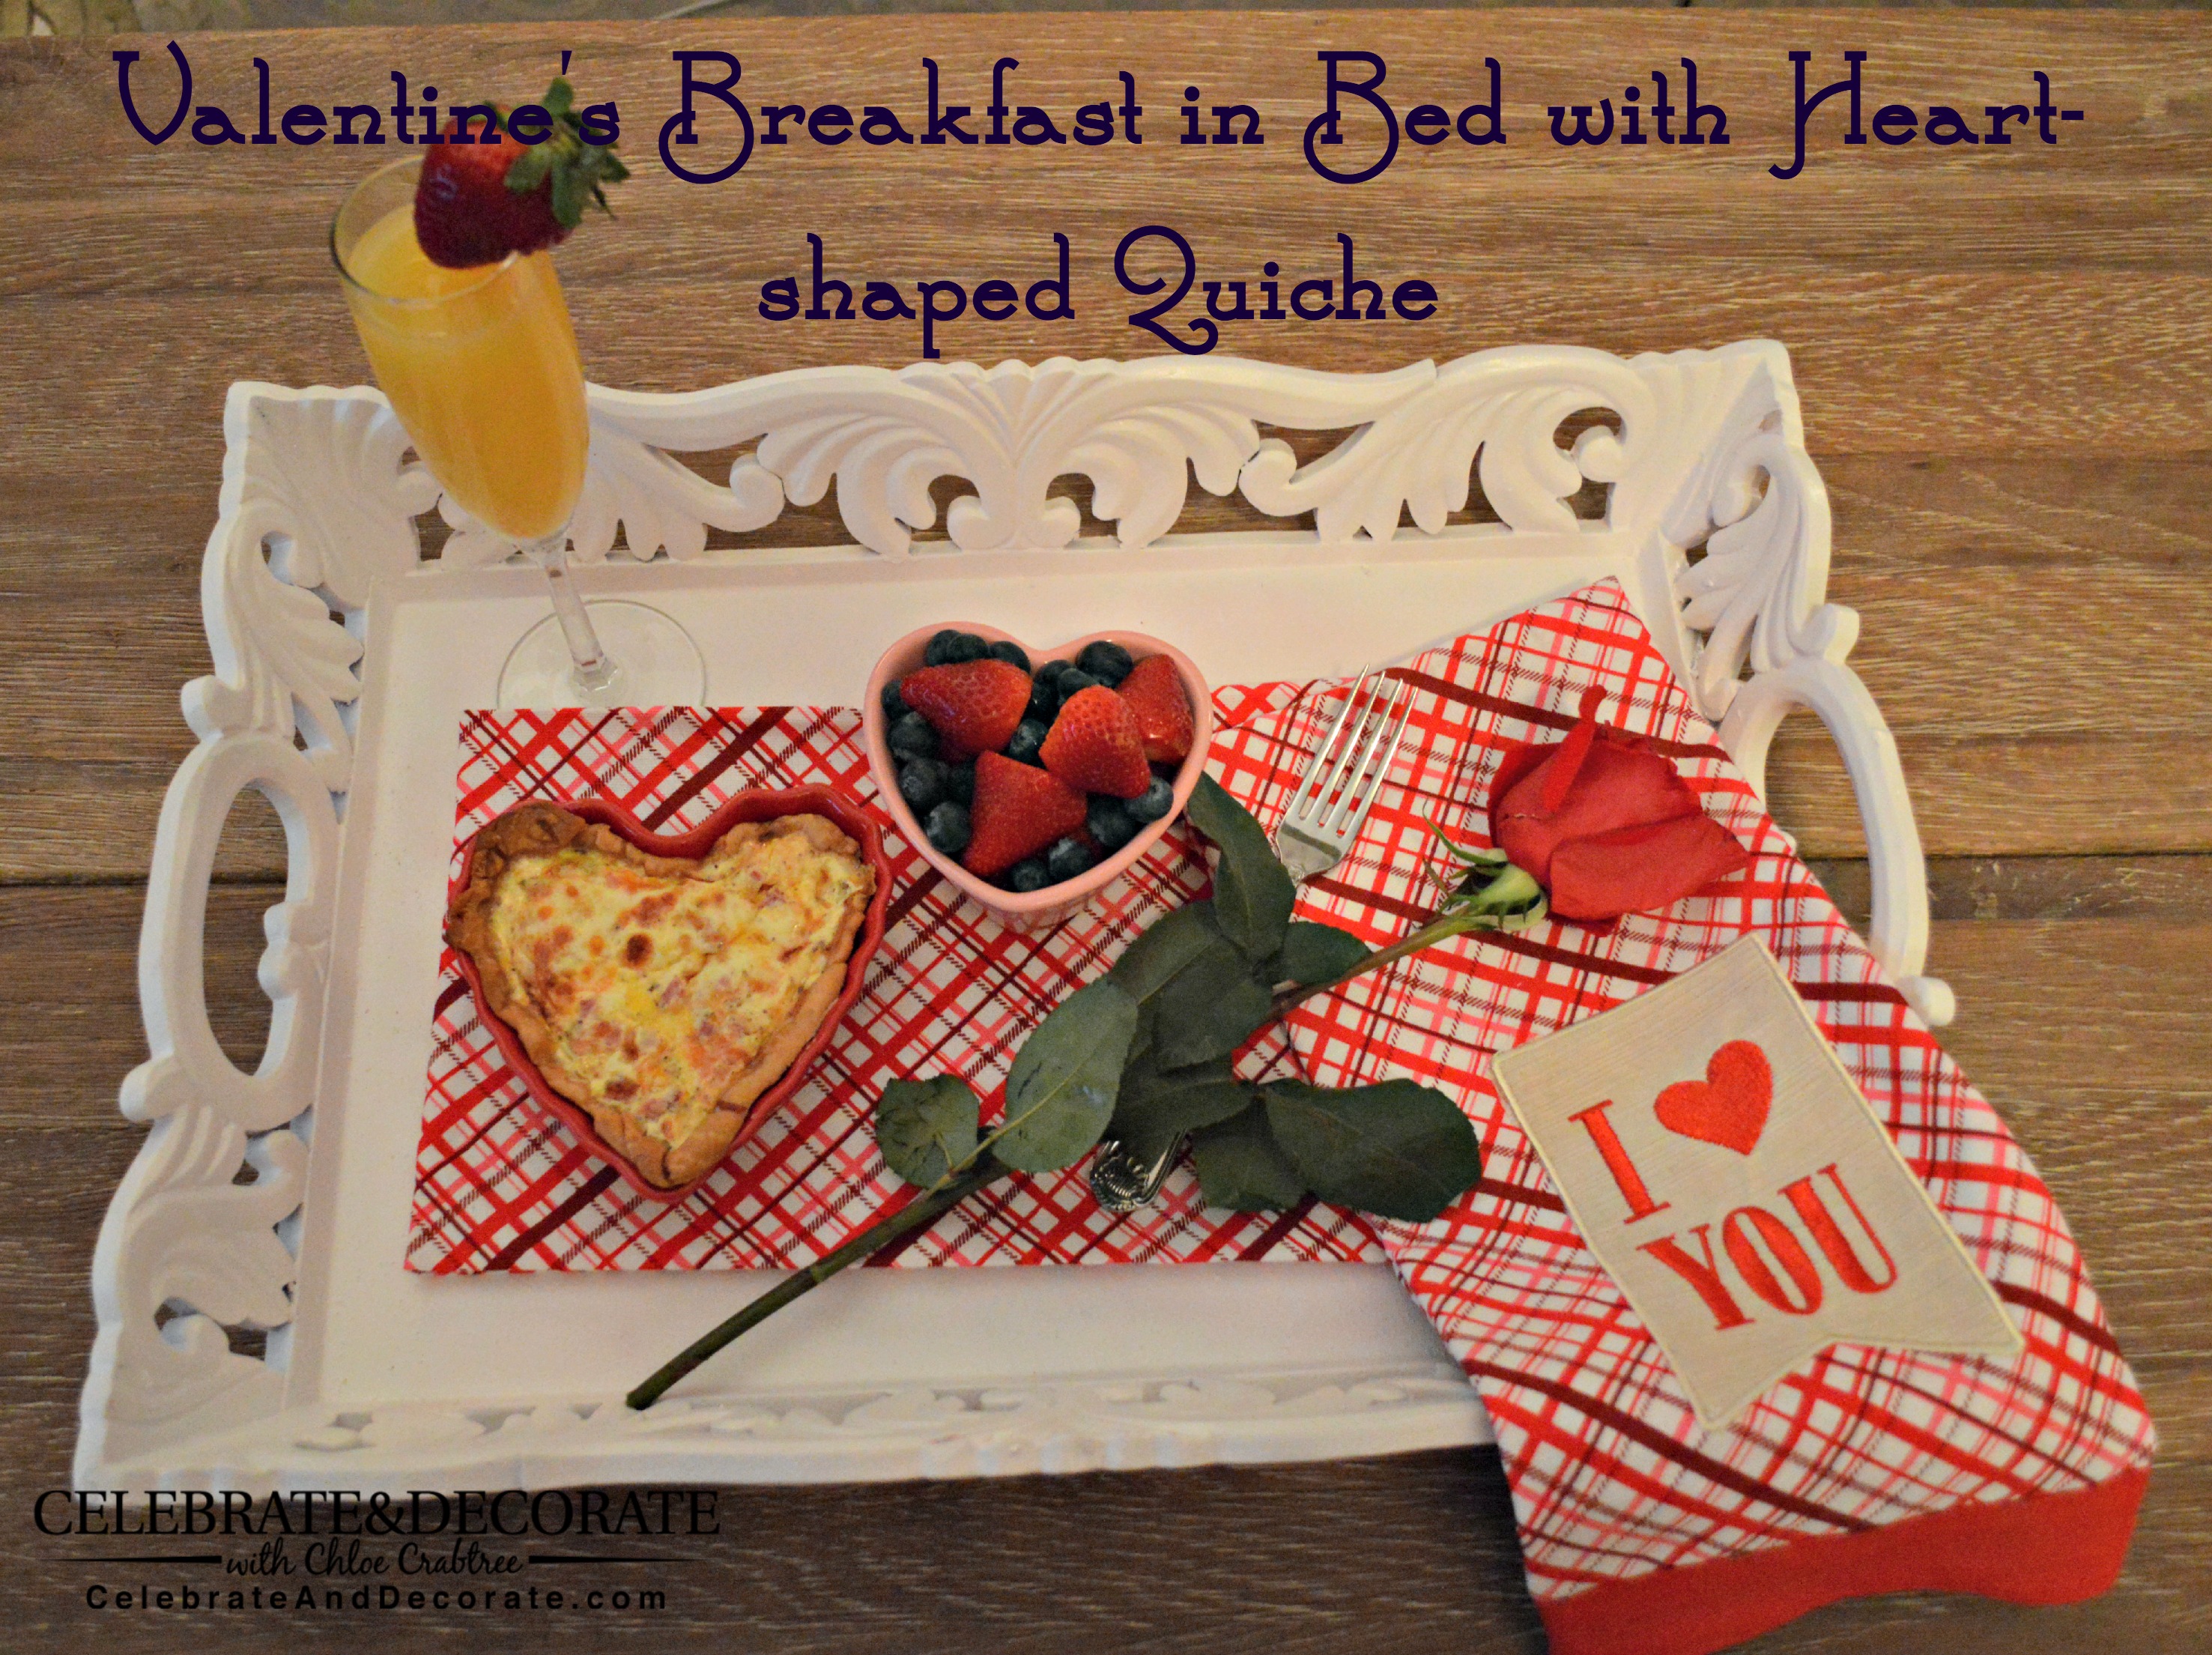 Valentine’s Breakfast in Bed with Heart-shaped Quiche